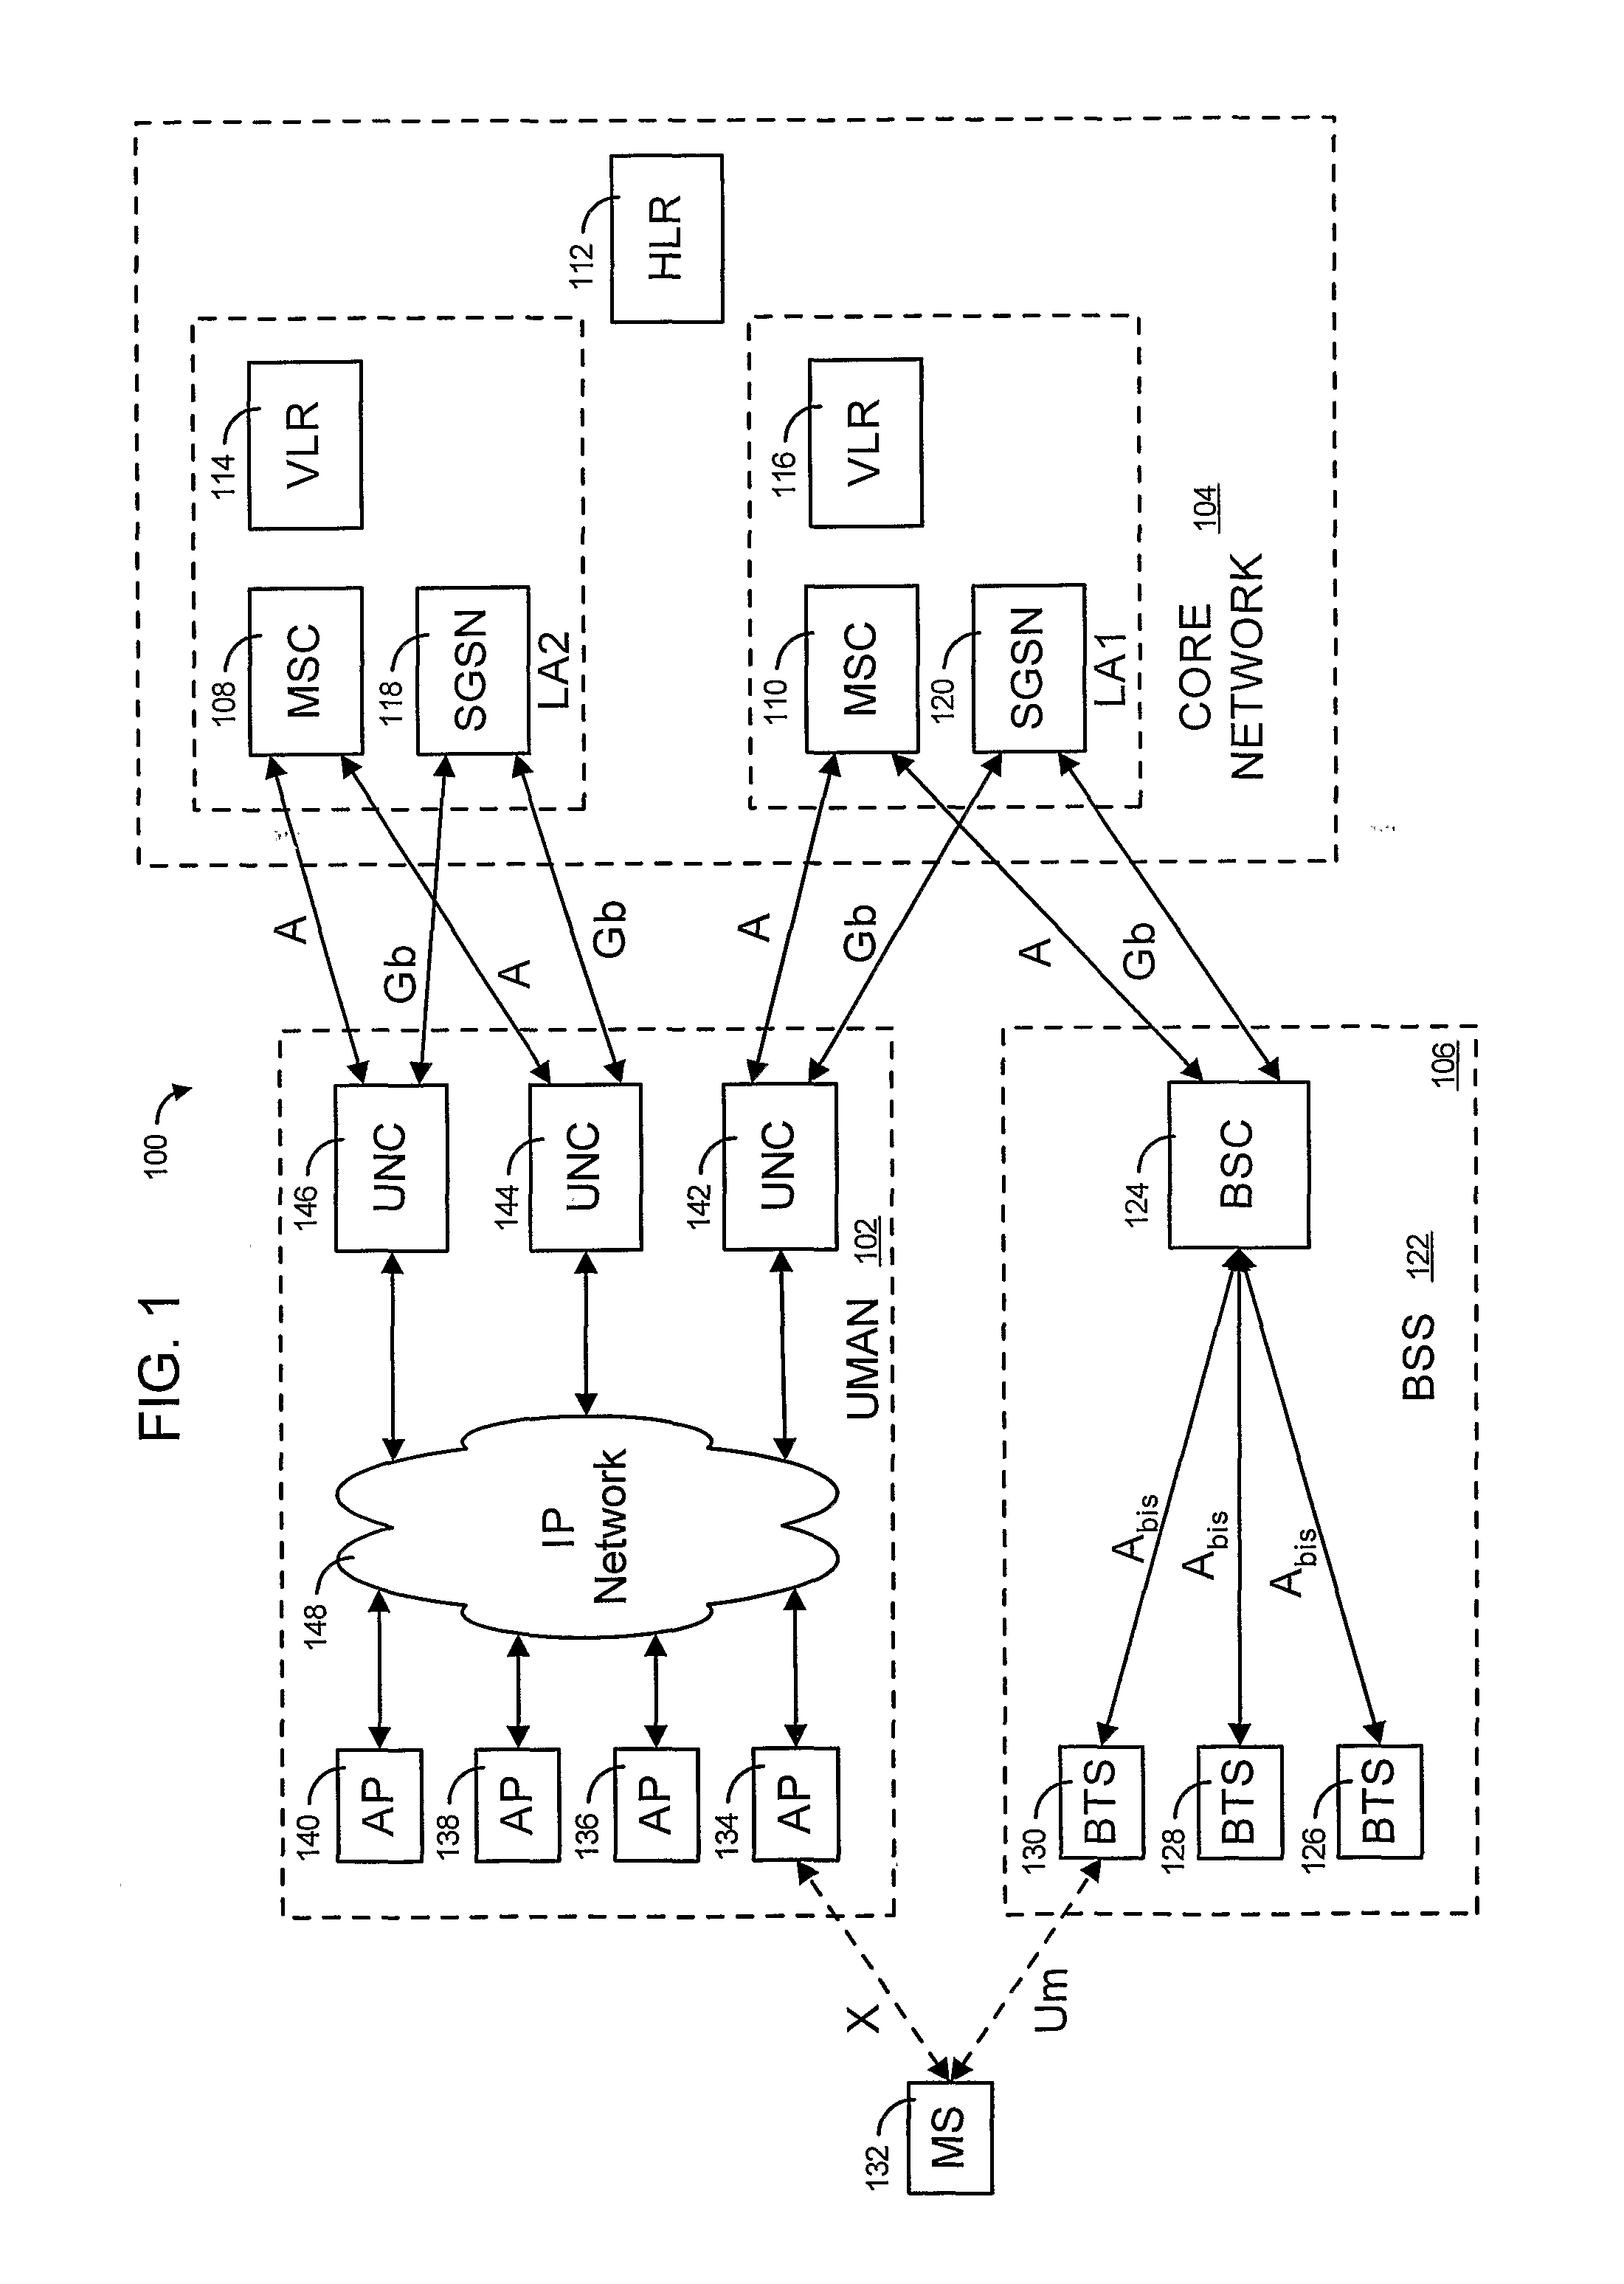 Method and system to assign mobile stations to an unlicensed mobile access network controller in an unlicensed radio access network